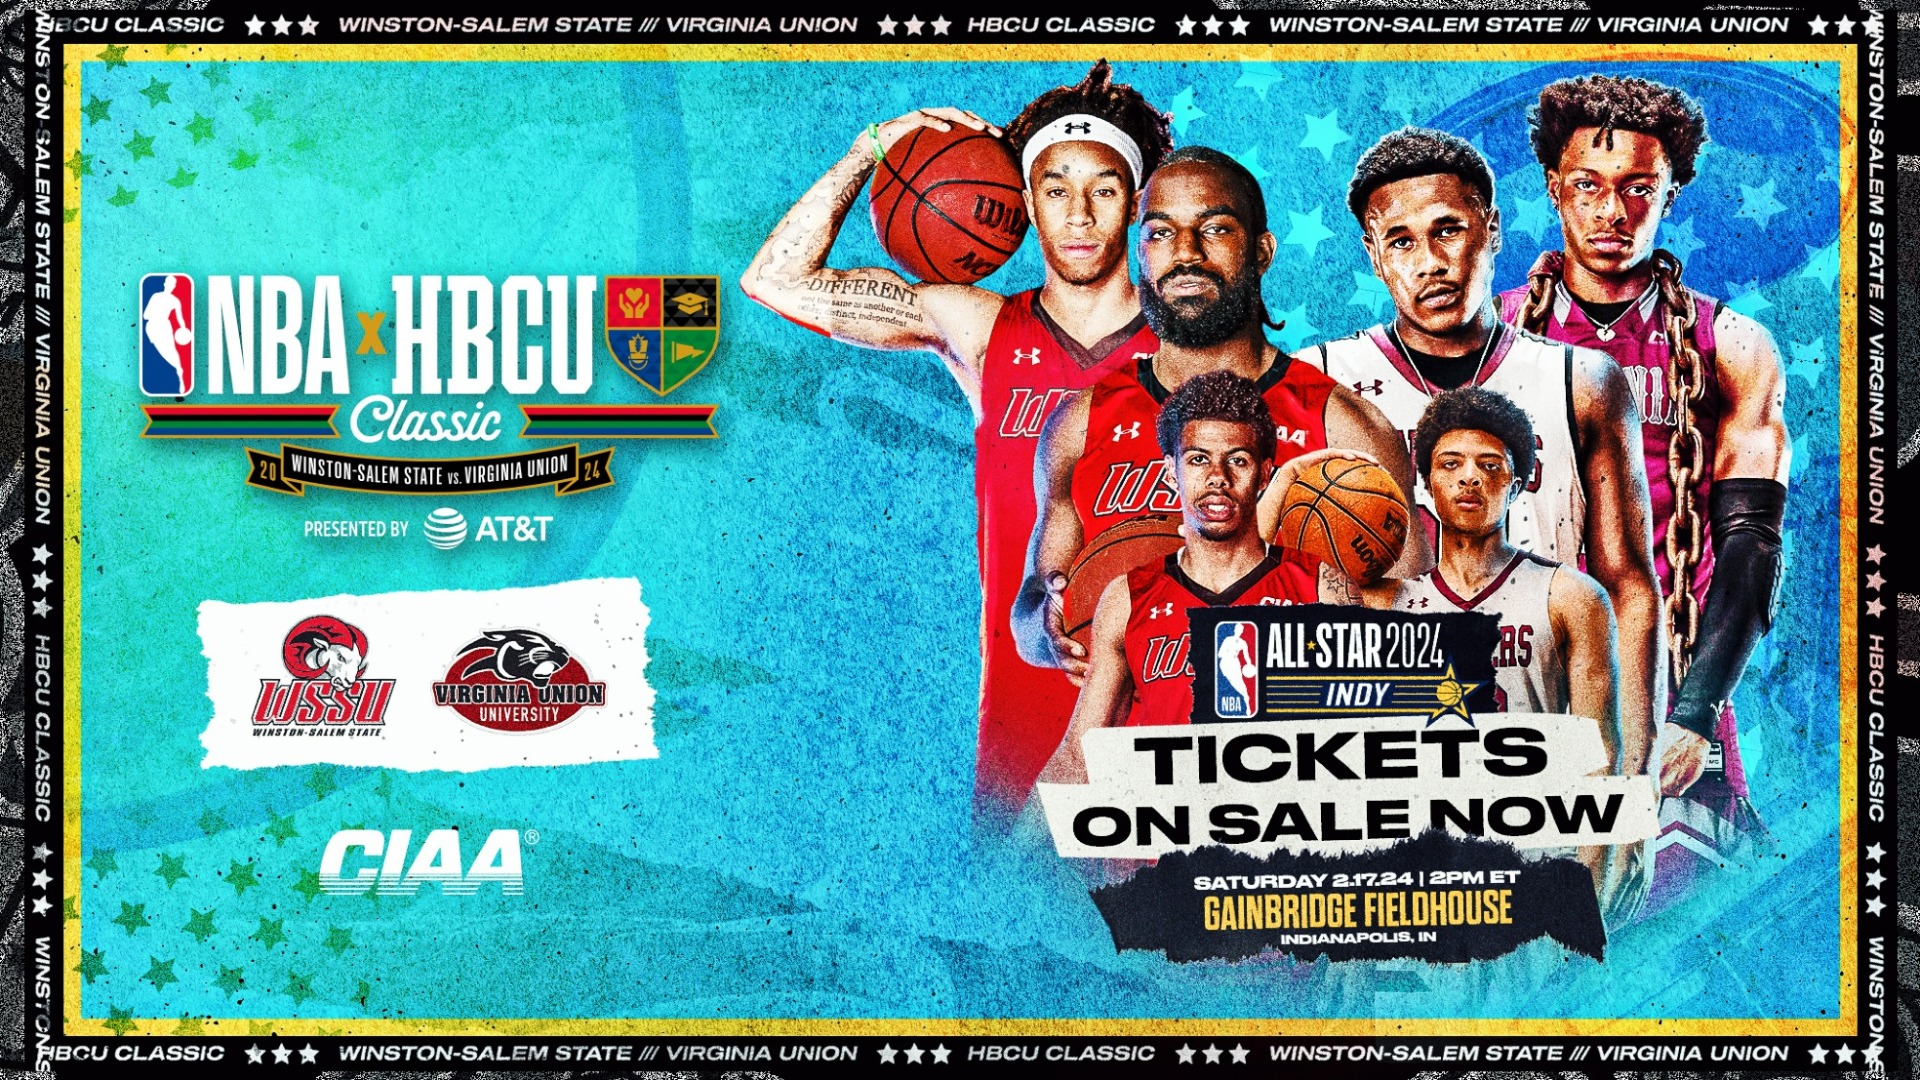 Nba Hbcu Classic To Be Presented By At T Winston Salem